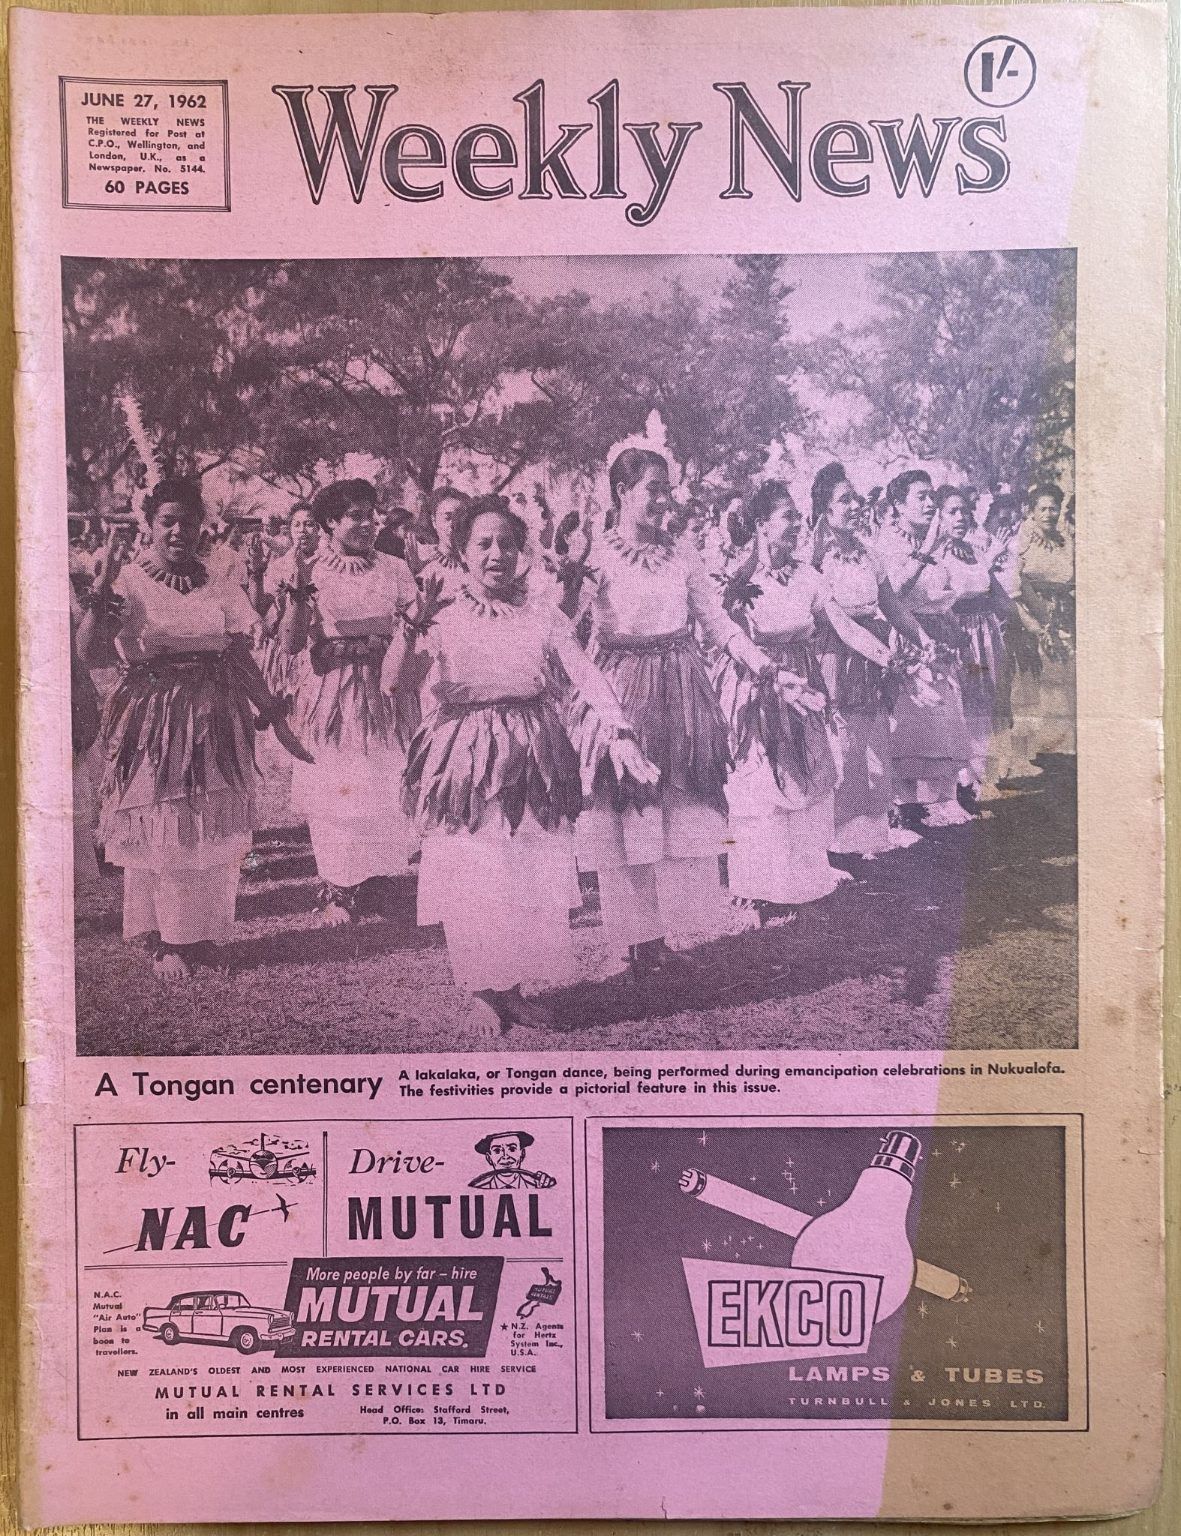 OLD NEWSPAPER: The Weekly News, No. 5144, 27 June 1962